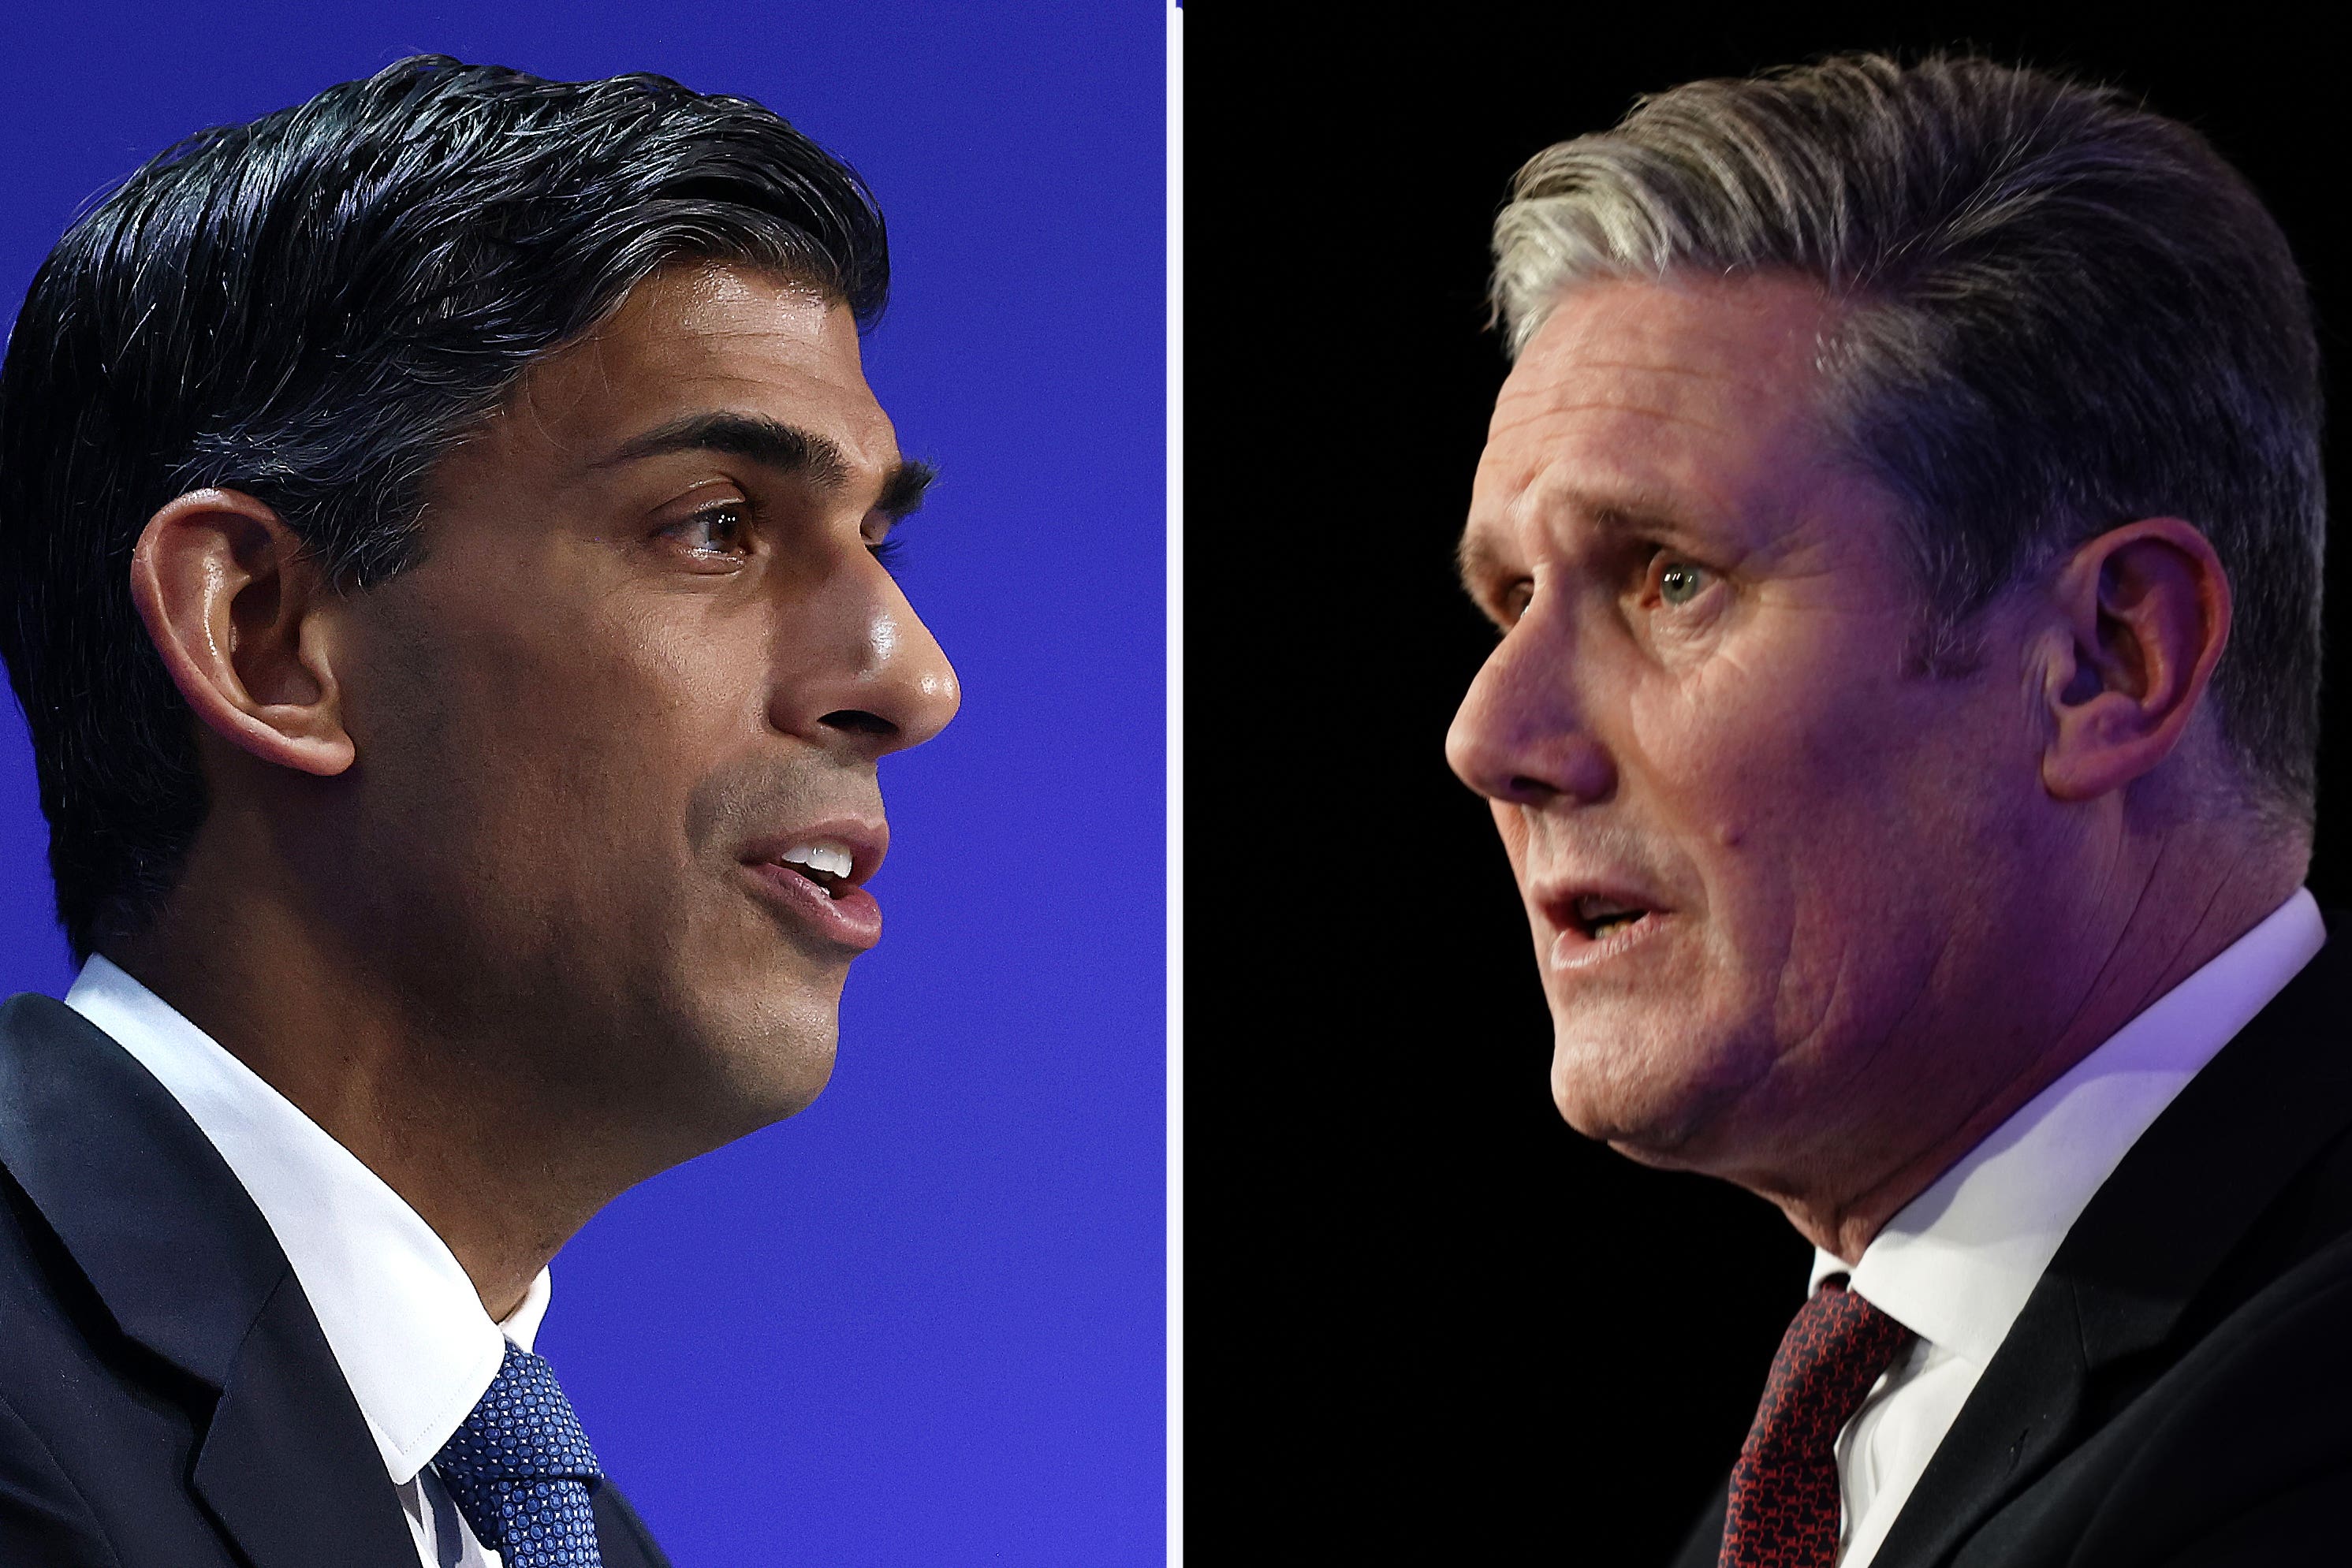 Prime Minister Rishi Sunak and Labour leader Sir Keir Starmer (PA)